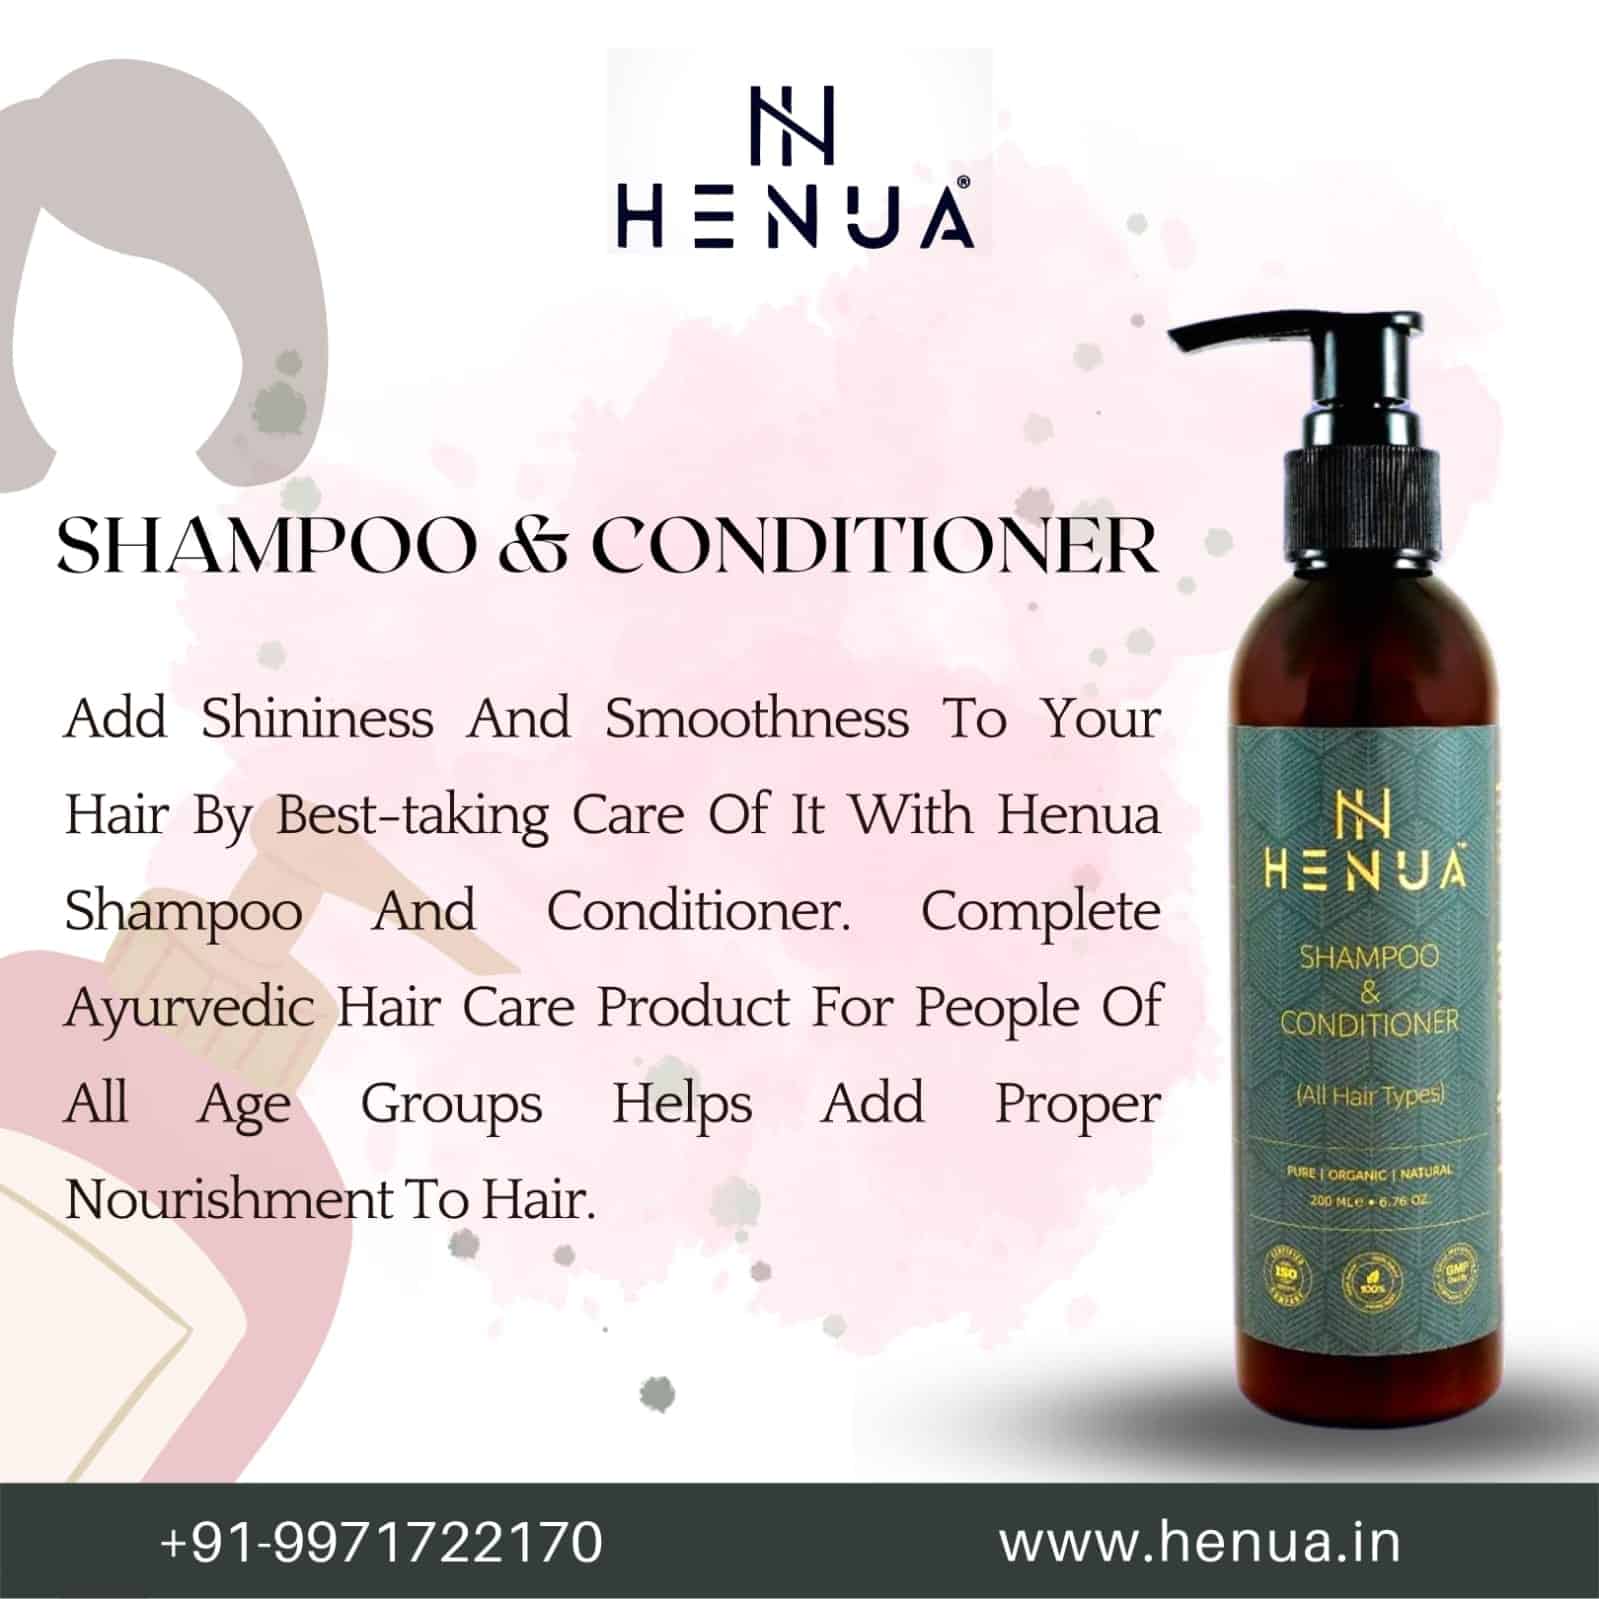 Natural-Shampoo-And-Conditioner-From-Henua-For-Your-Hair